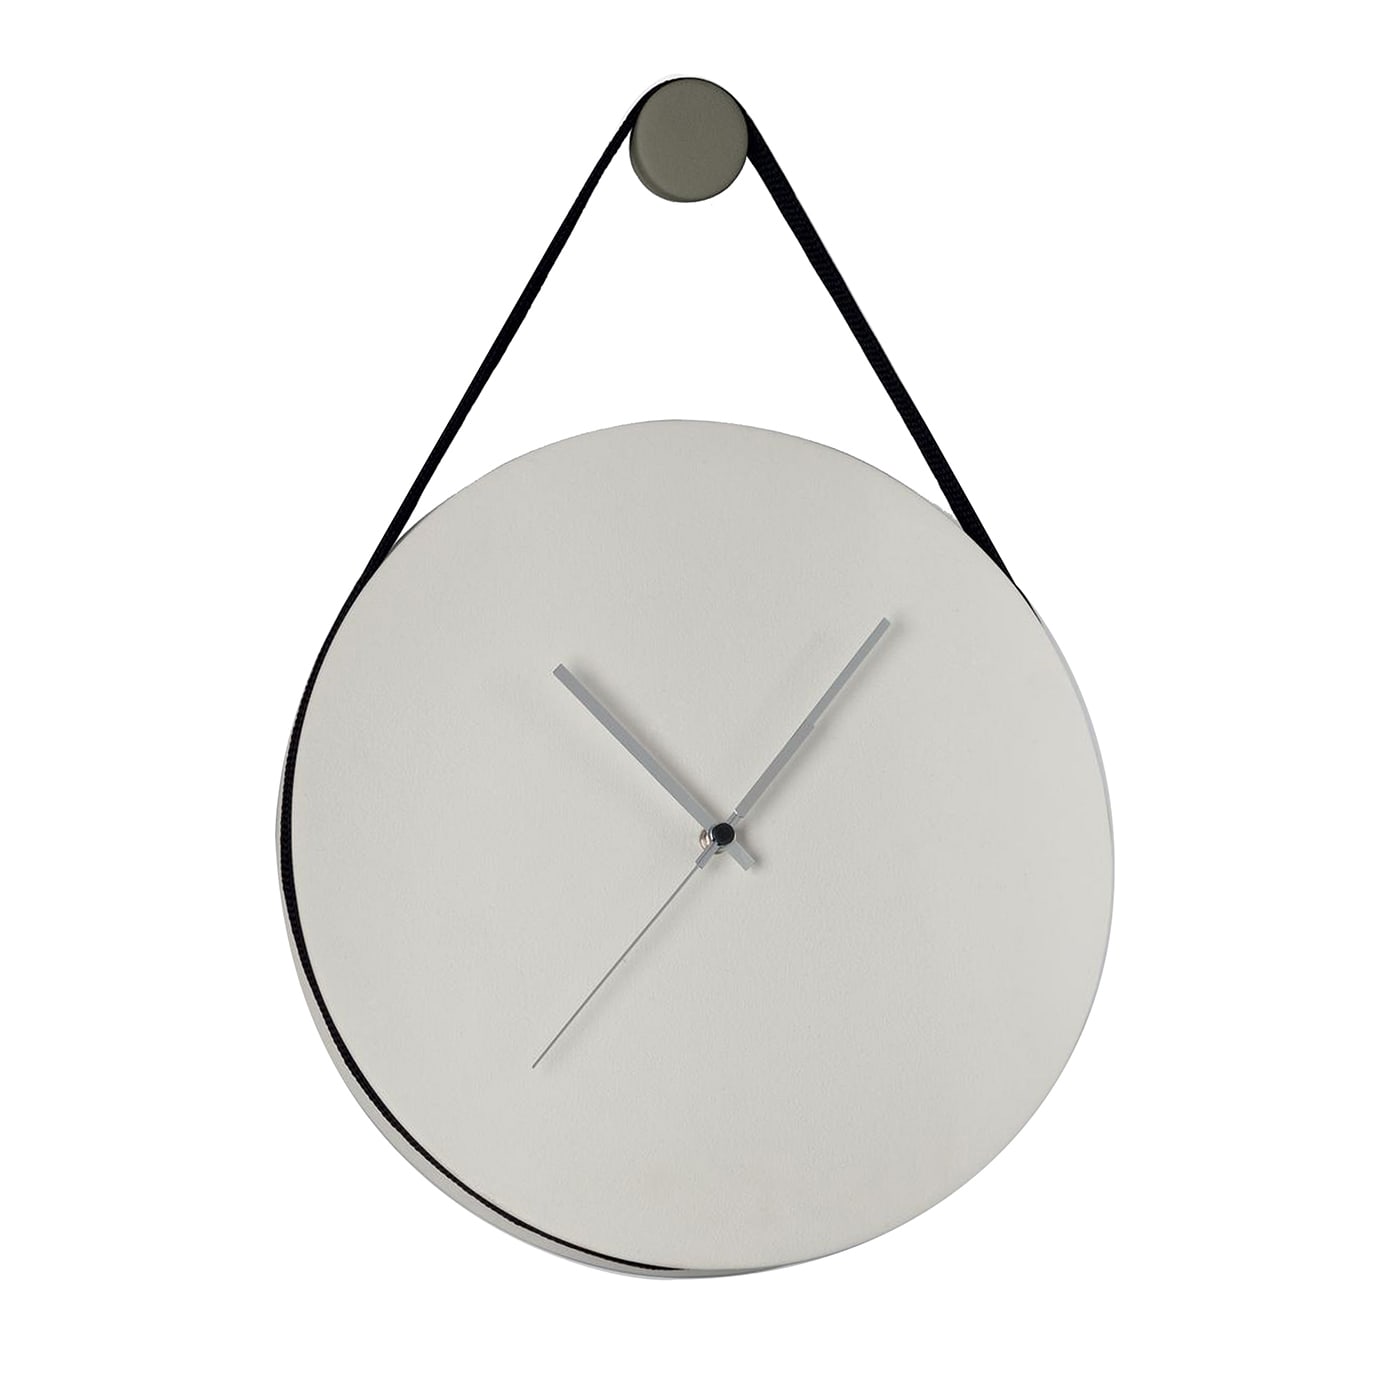 Time to Lineasette clock #3 - Lineasette